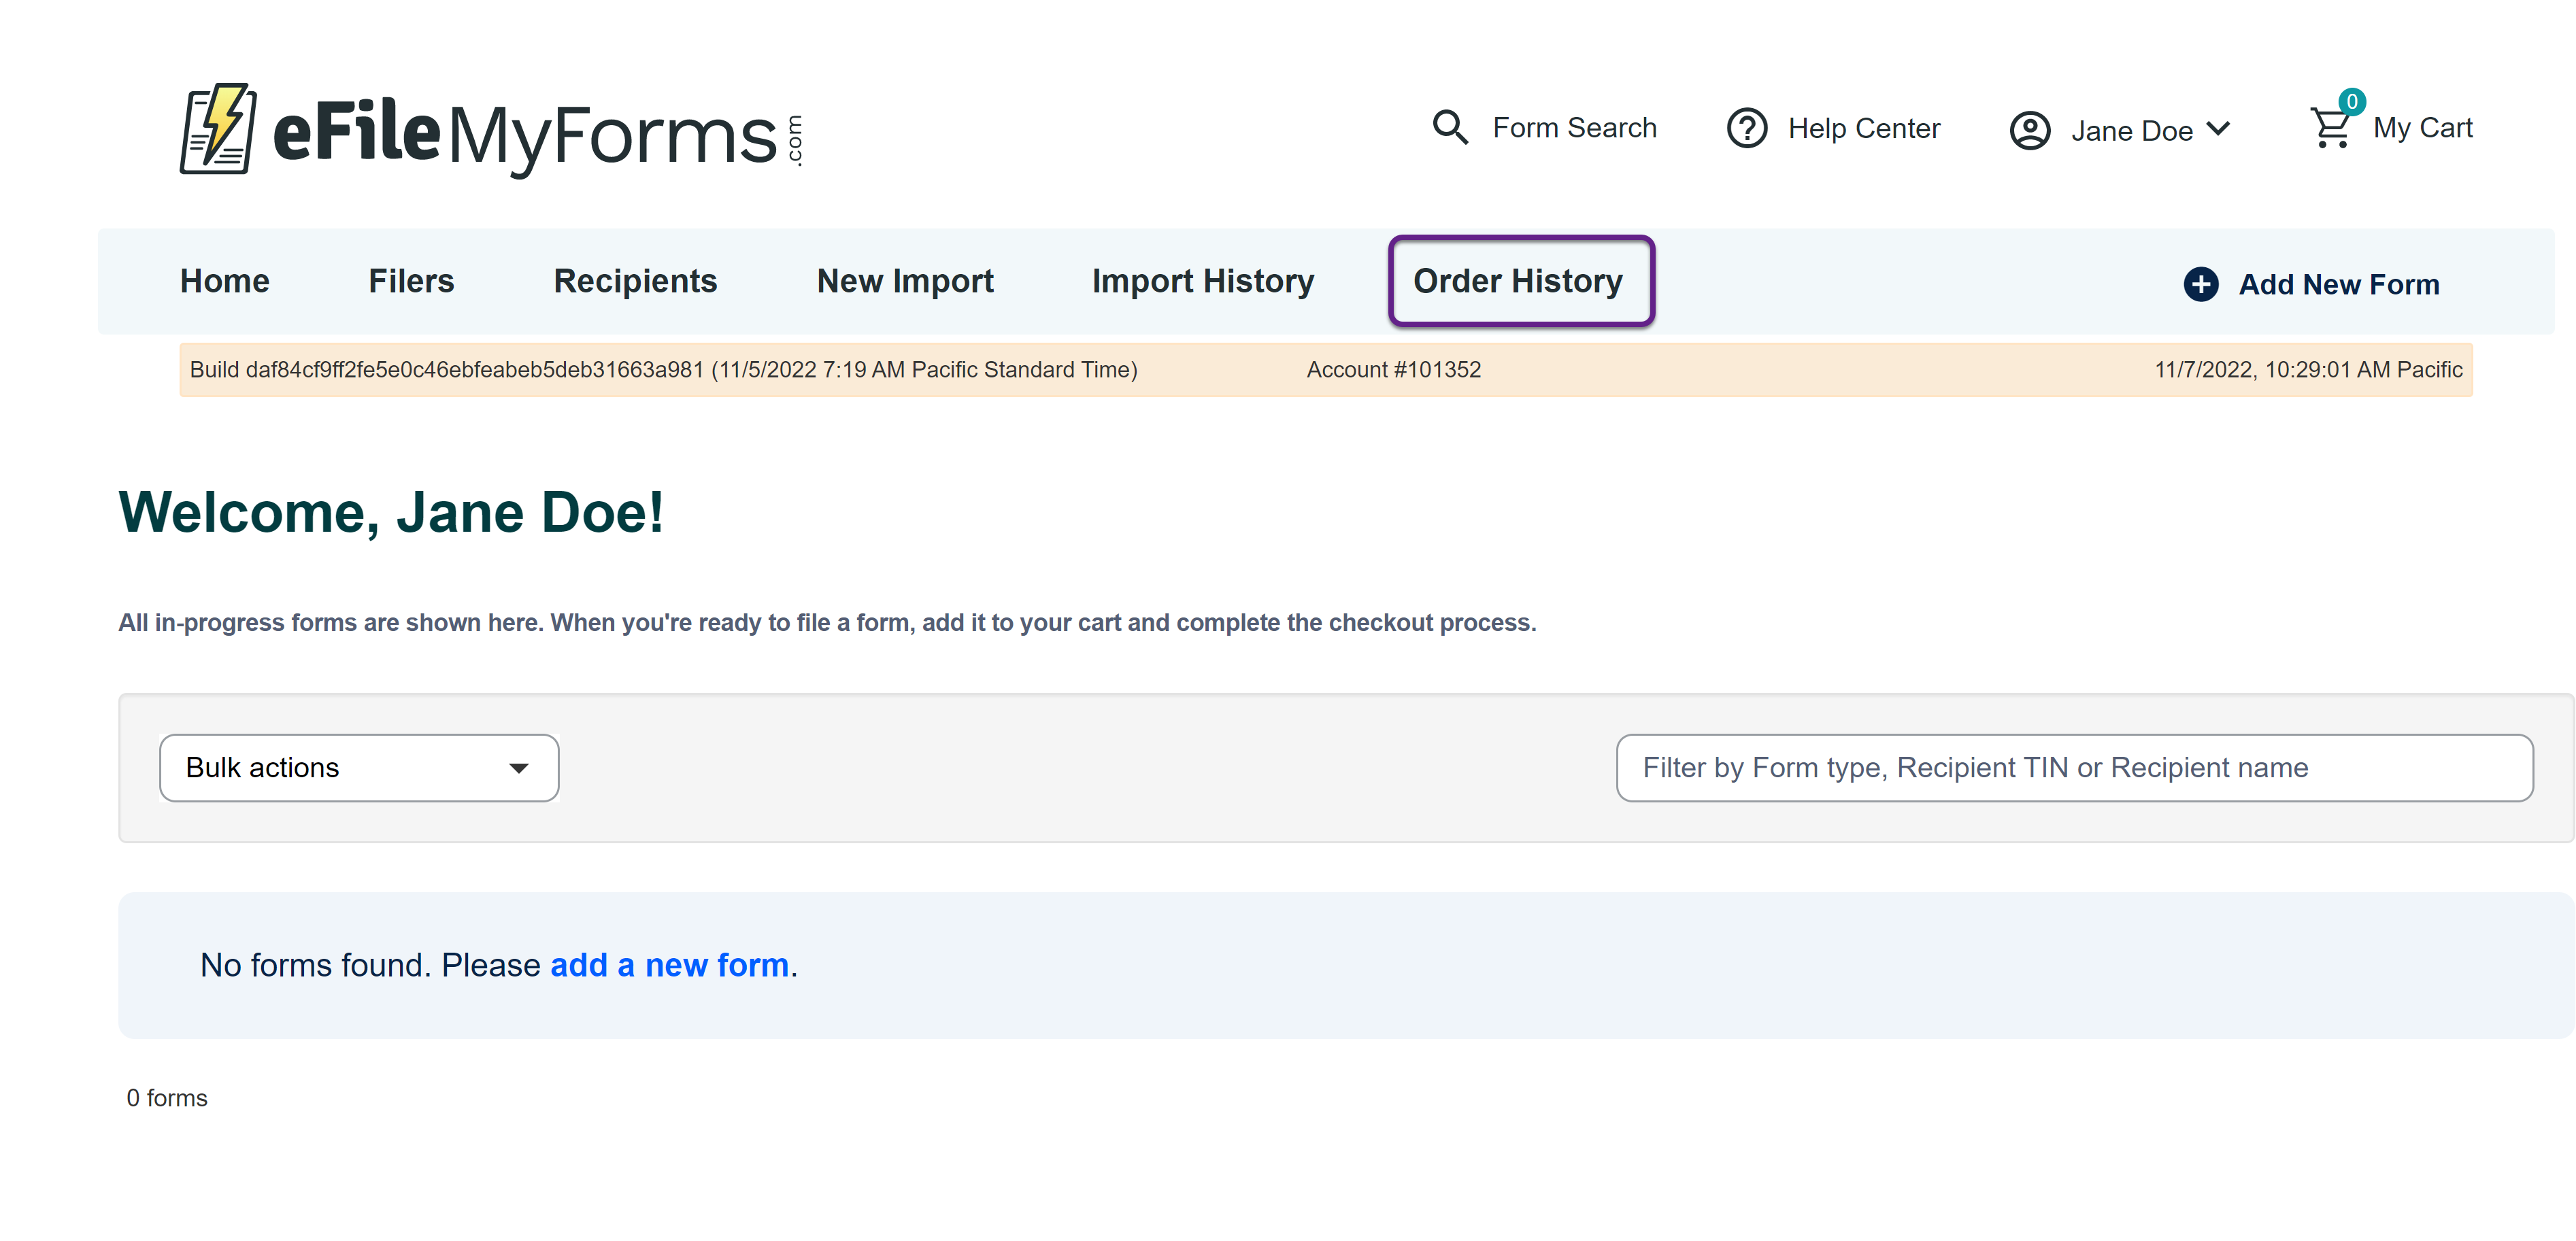 Image of the Home page with a callout on the Order History button.